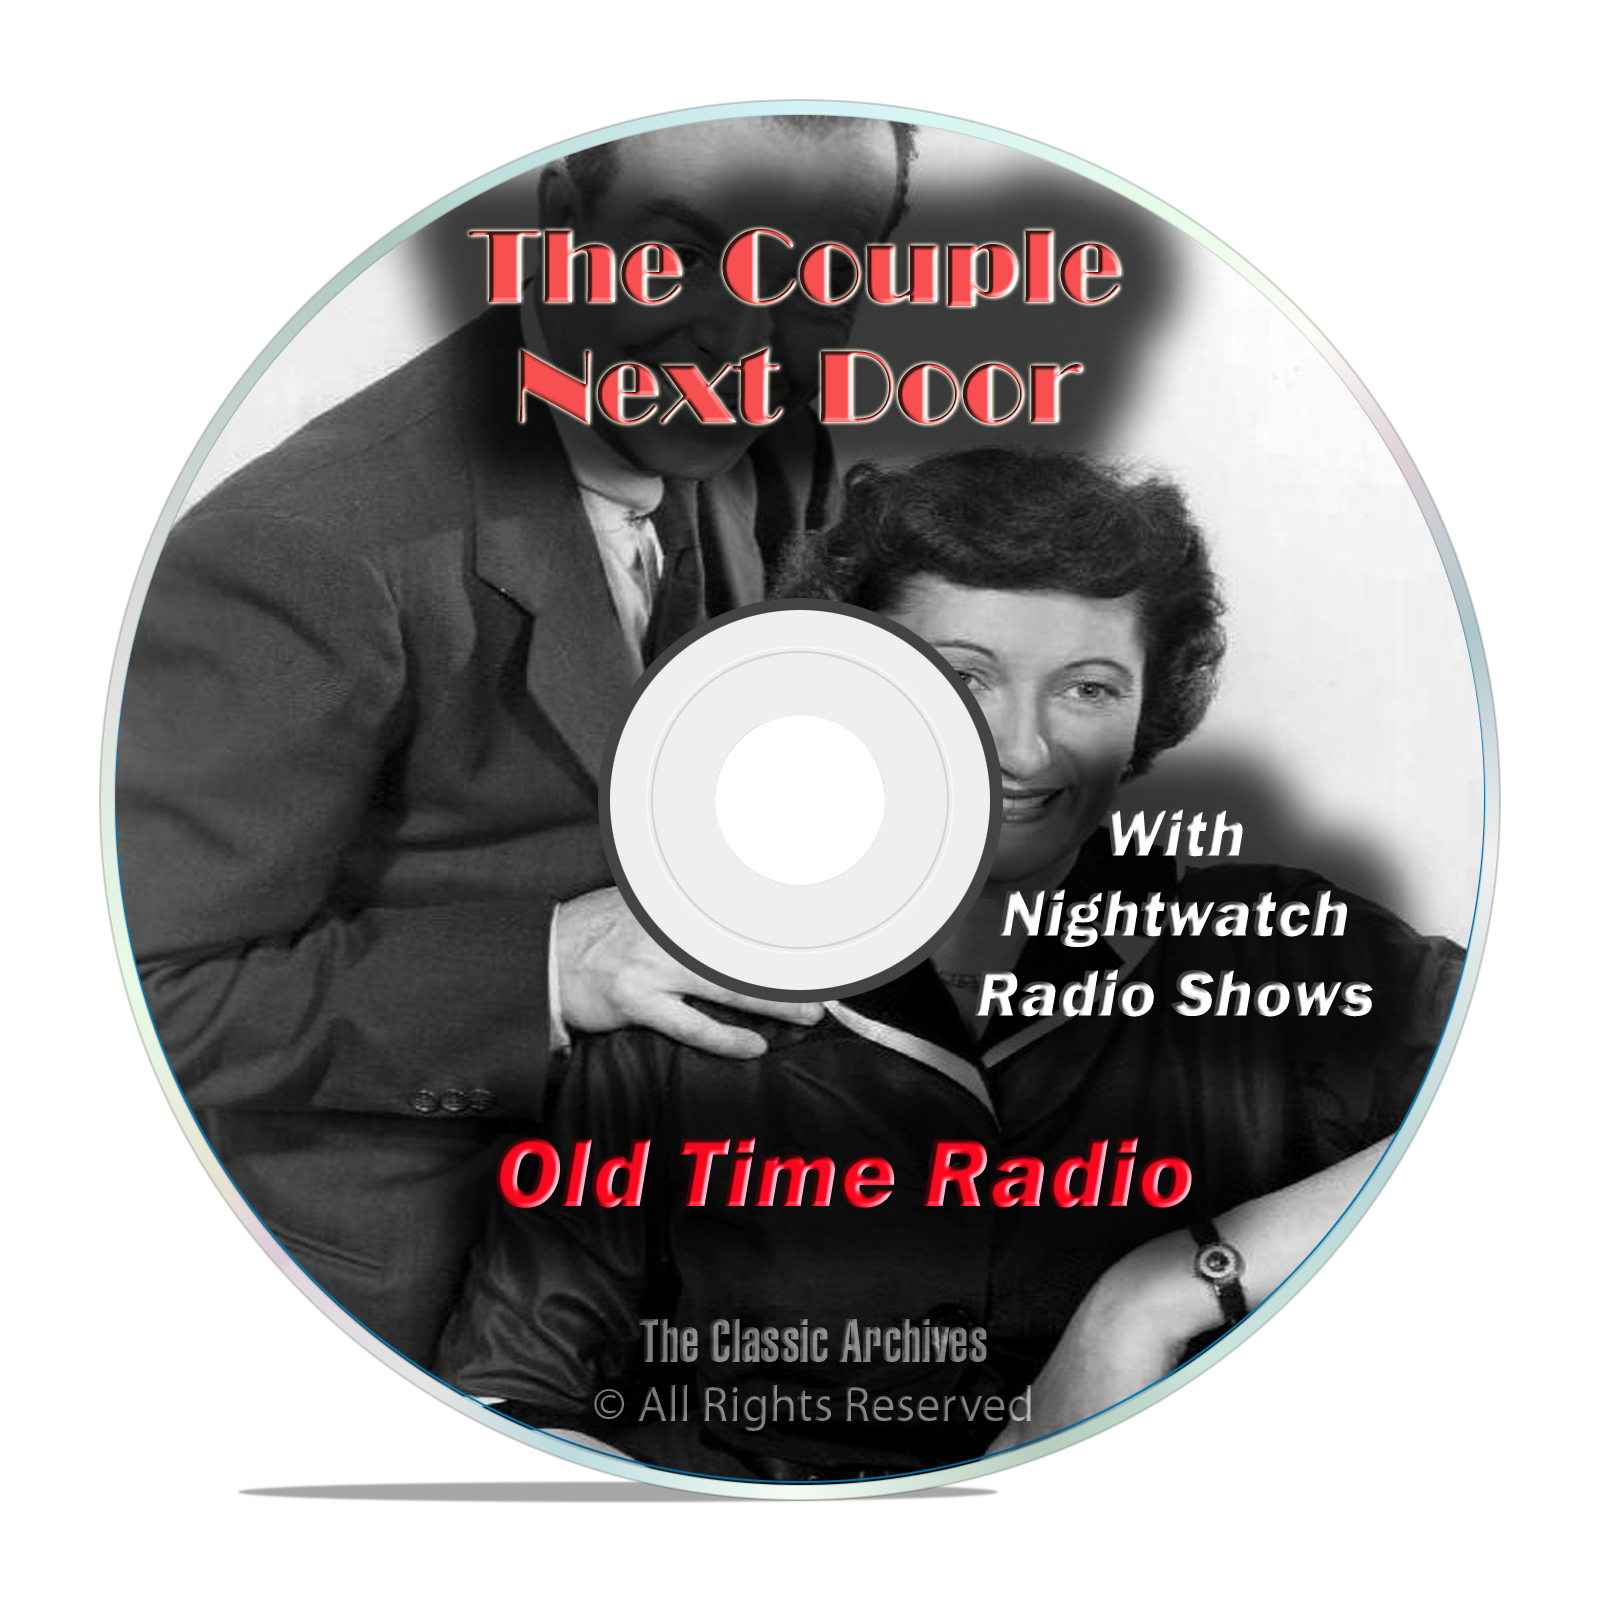 The Couple Next Door, 1,022 Classic Old Time Radio Drama Shows, OTR mp3 DVD